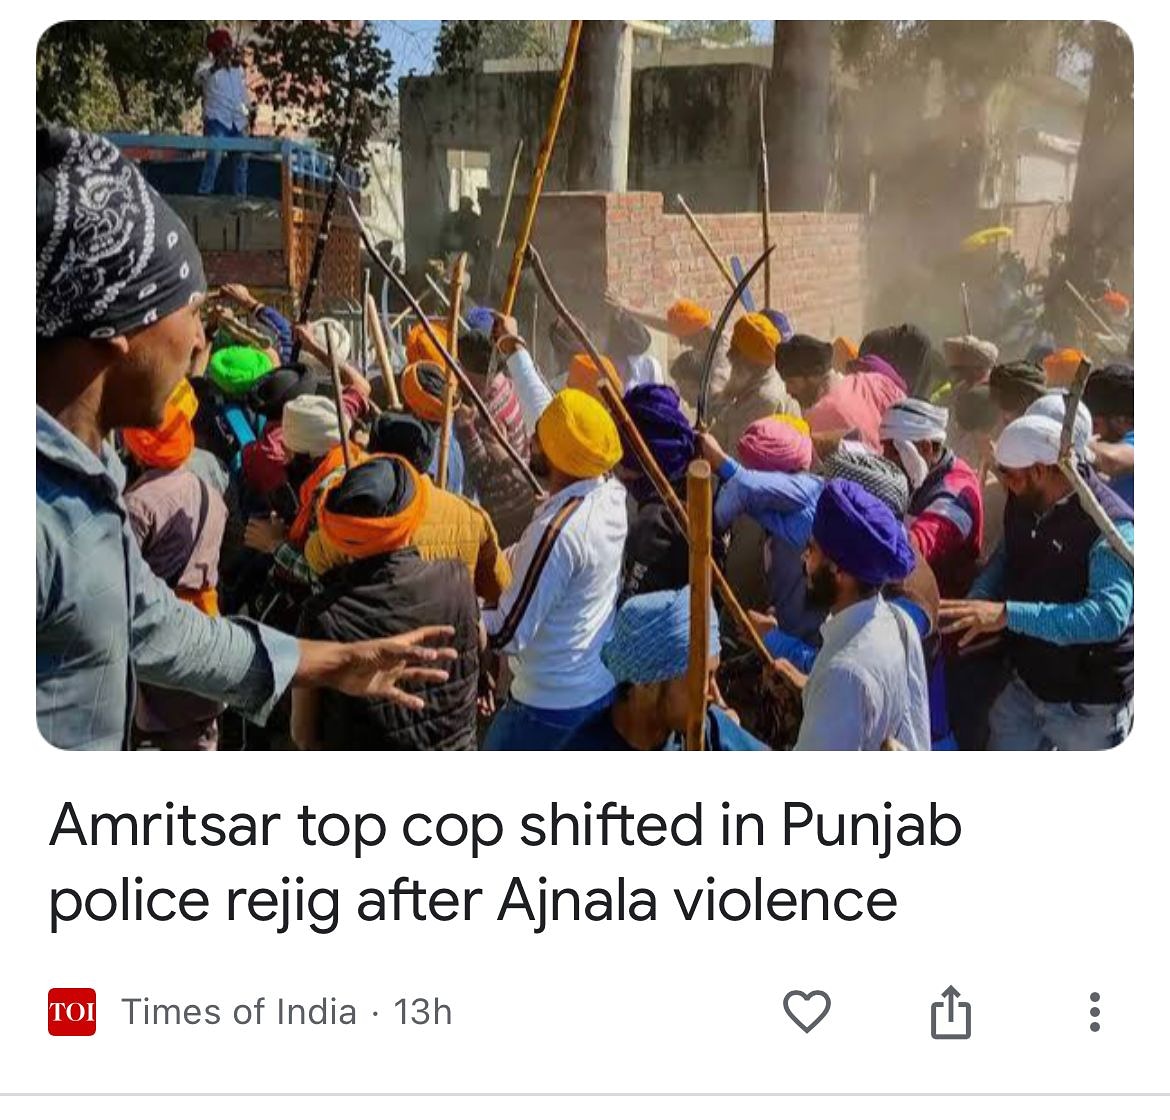 Personally being a Sikh I am very happy with this step that government has taken. We need such strict laws and cops to handle such goons. #StopKhalistanTerrorism #NahiChahidaKhalistan